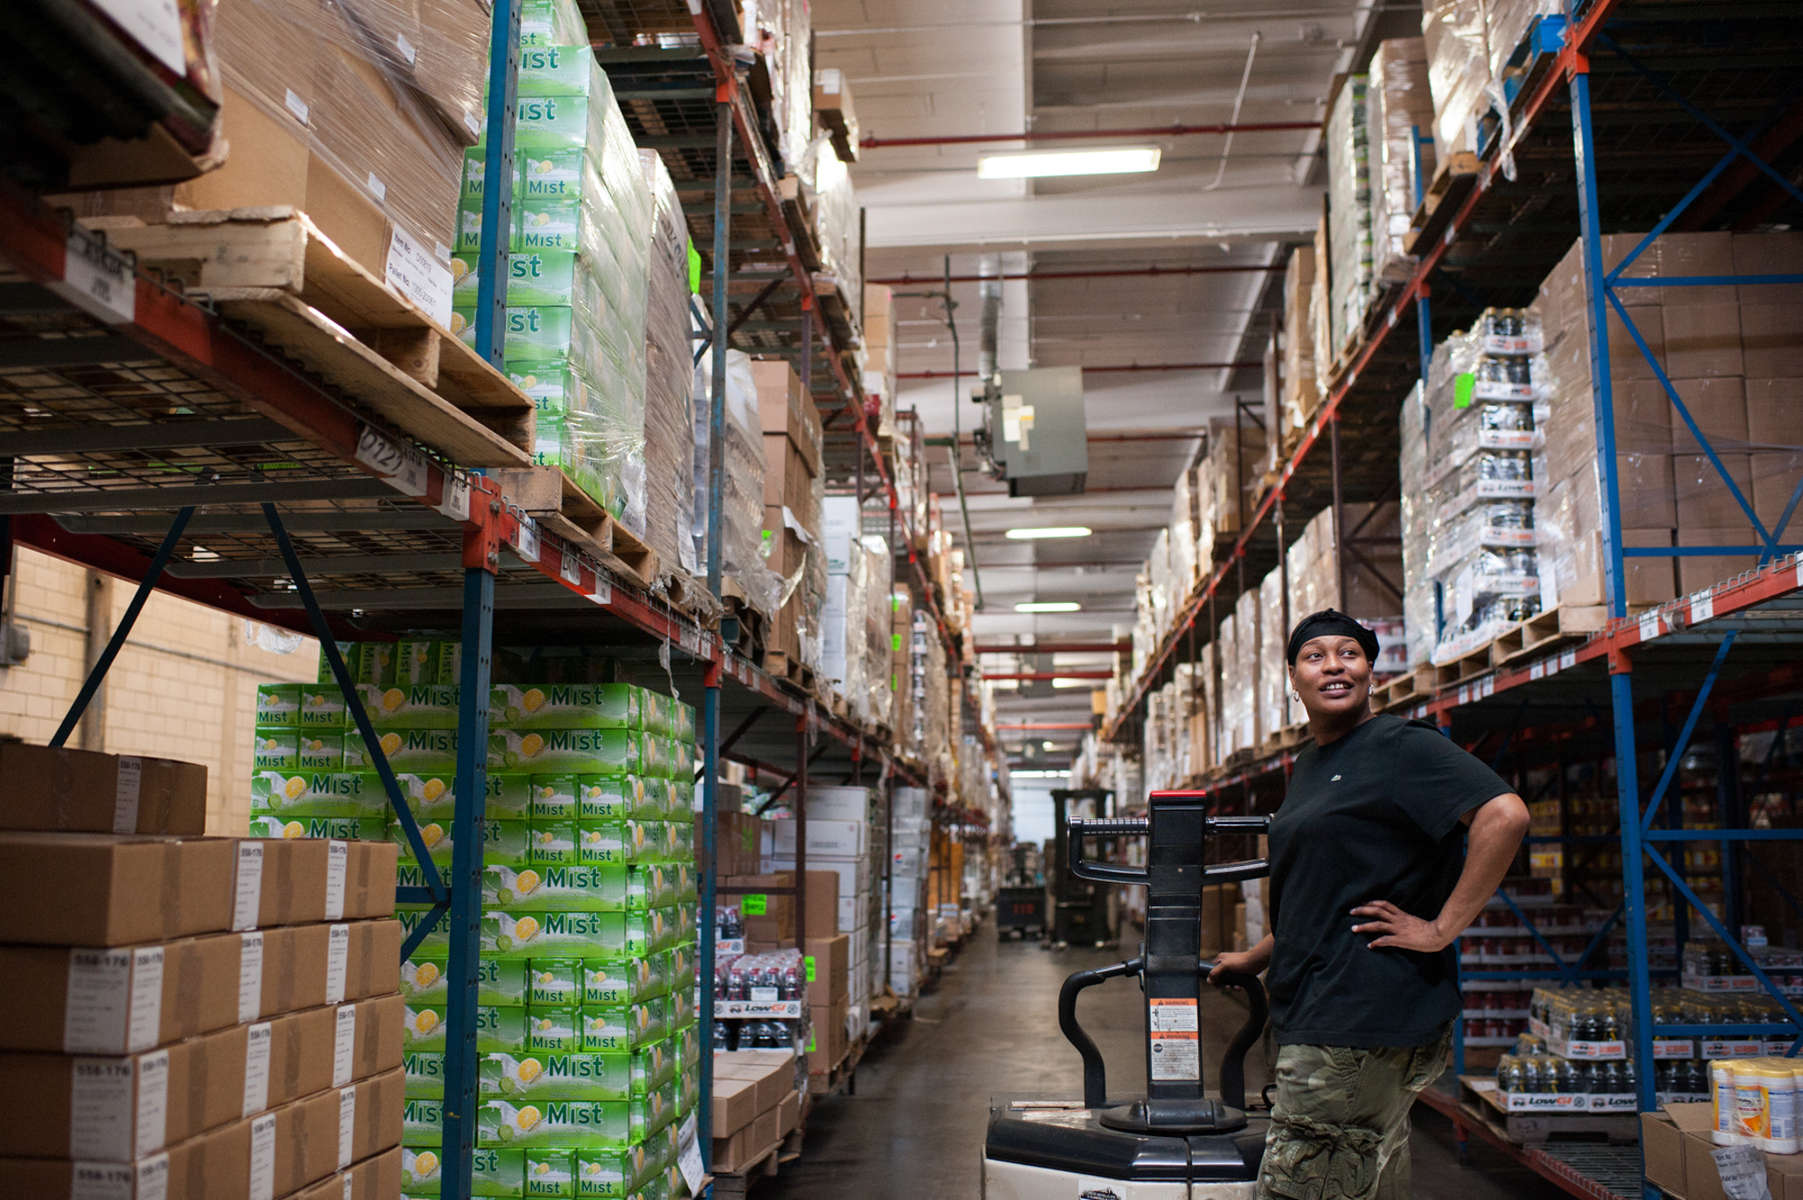 The Community Food Bank of New Jersey is a 285,000 square foot facility located in Hillsdale, New Jersey. Employees of the food bank buzz around the space, moving and organizing items. (May 13, 2014)Photo by Nancy Borowick